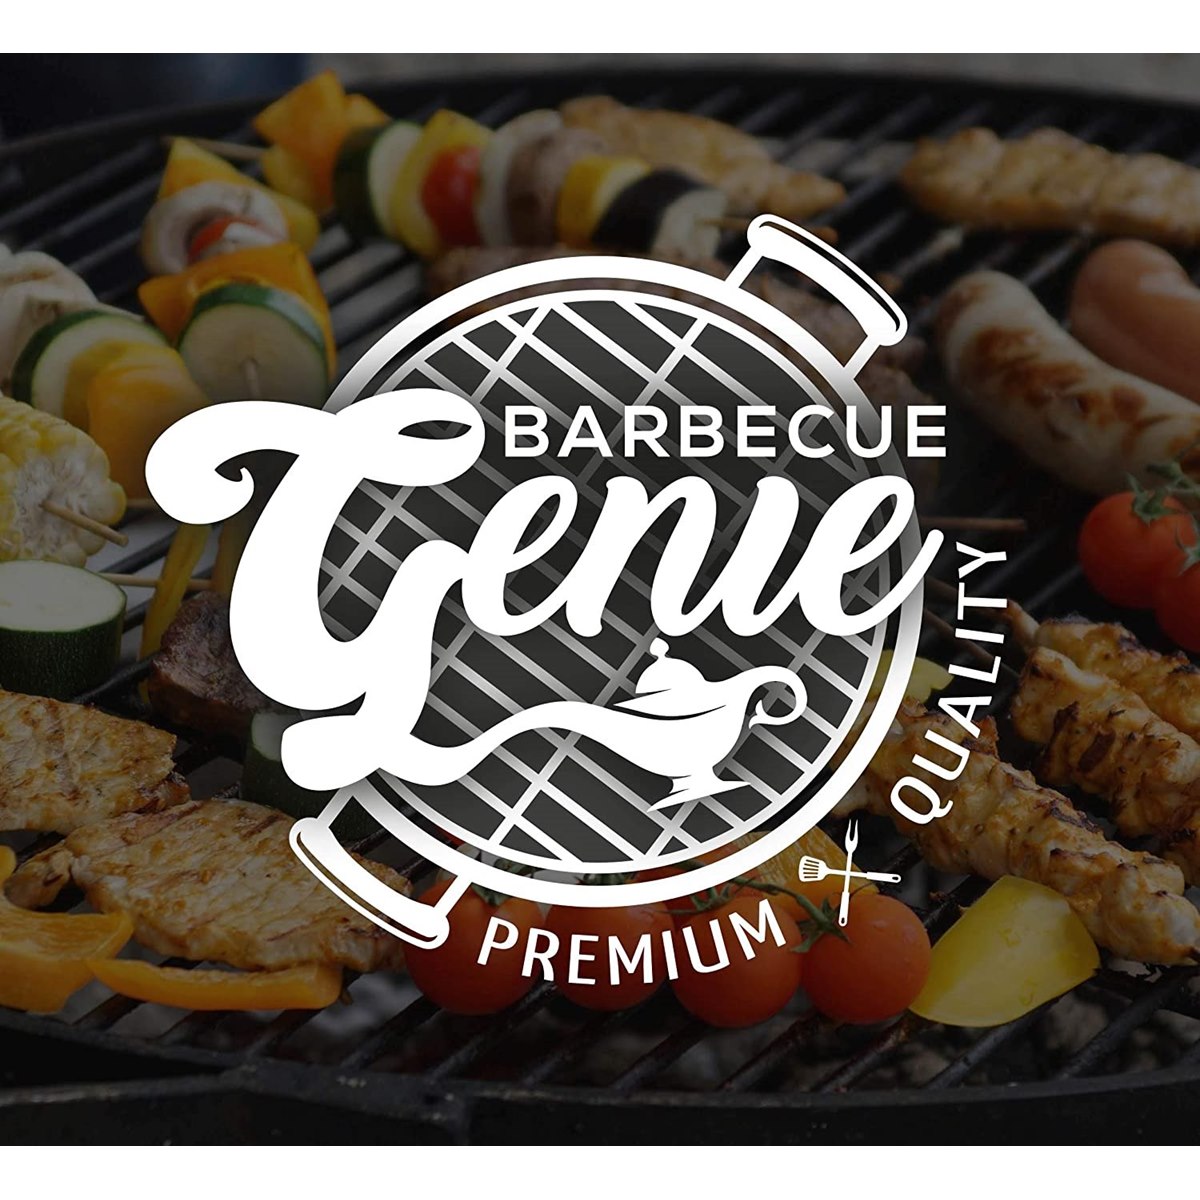 Where to Buy Barbecue Genie